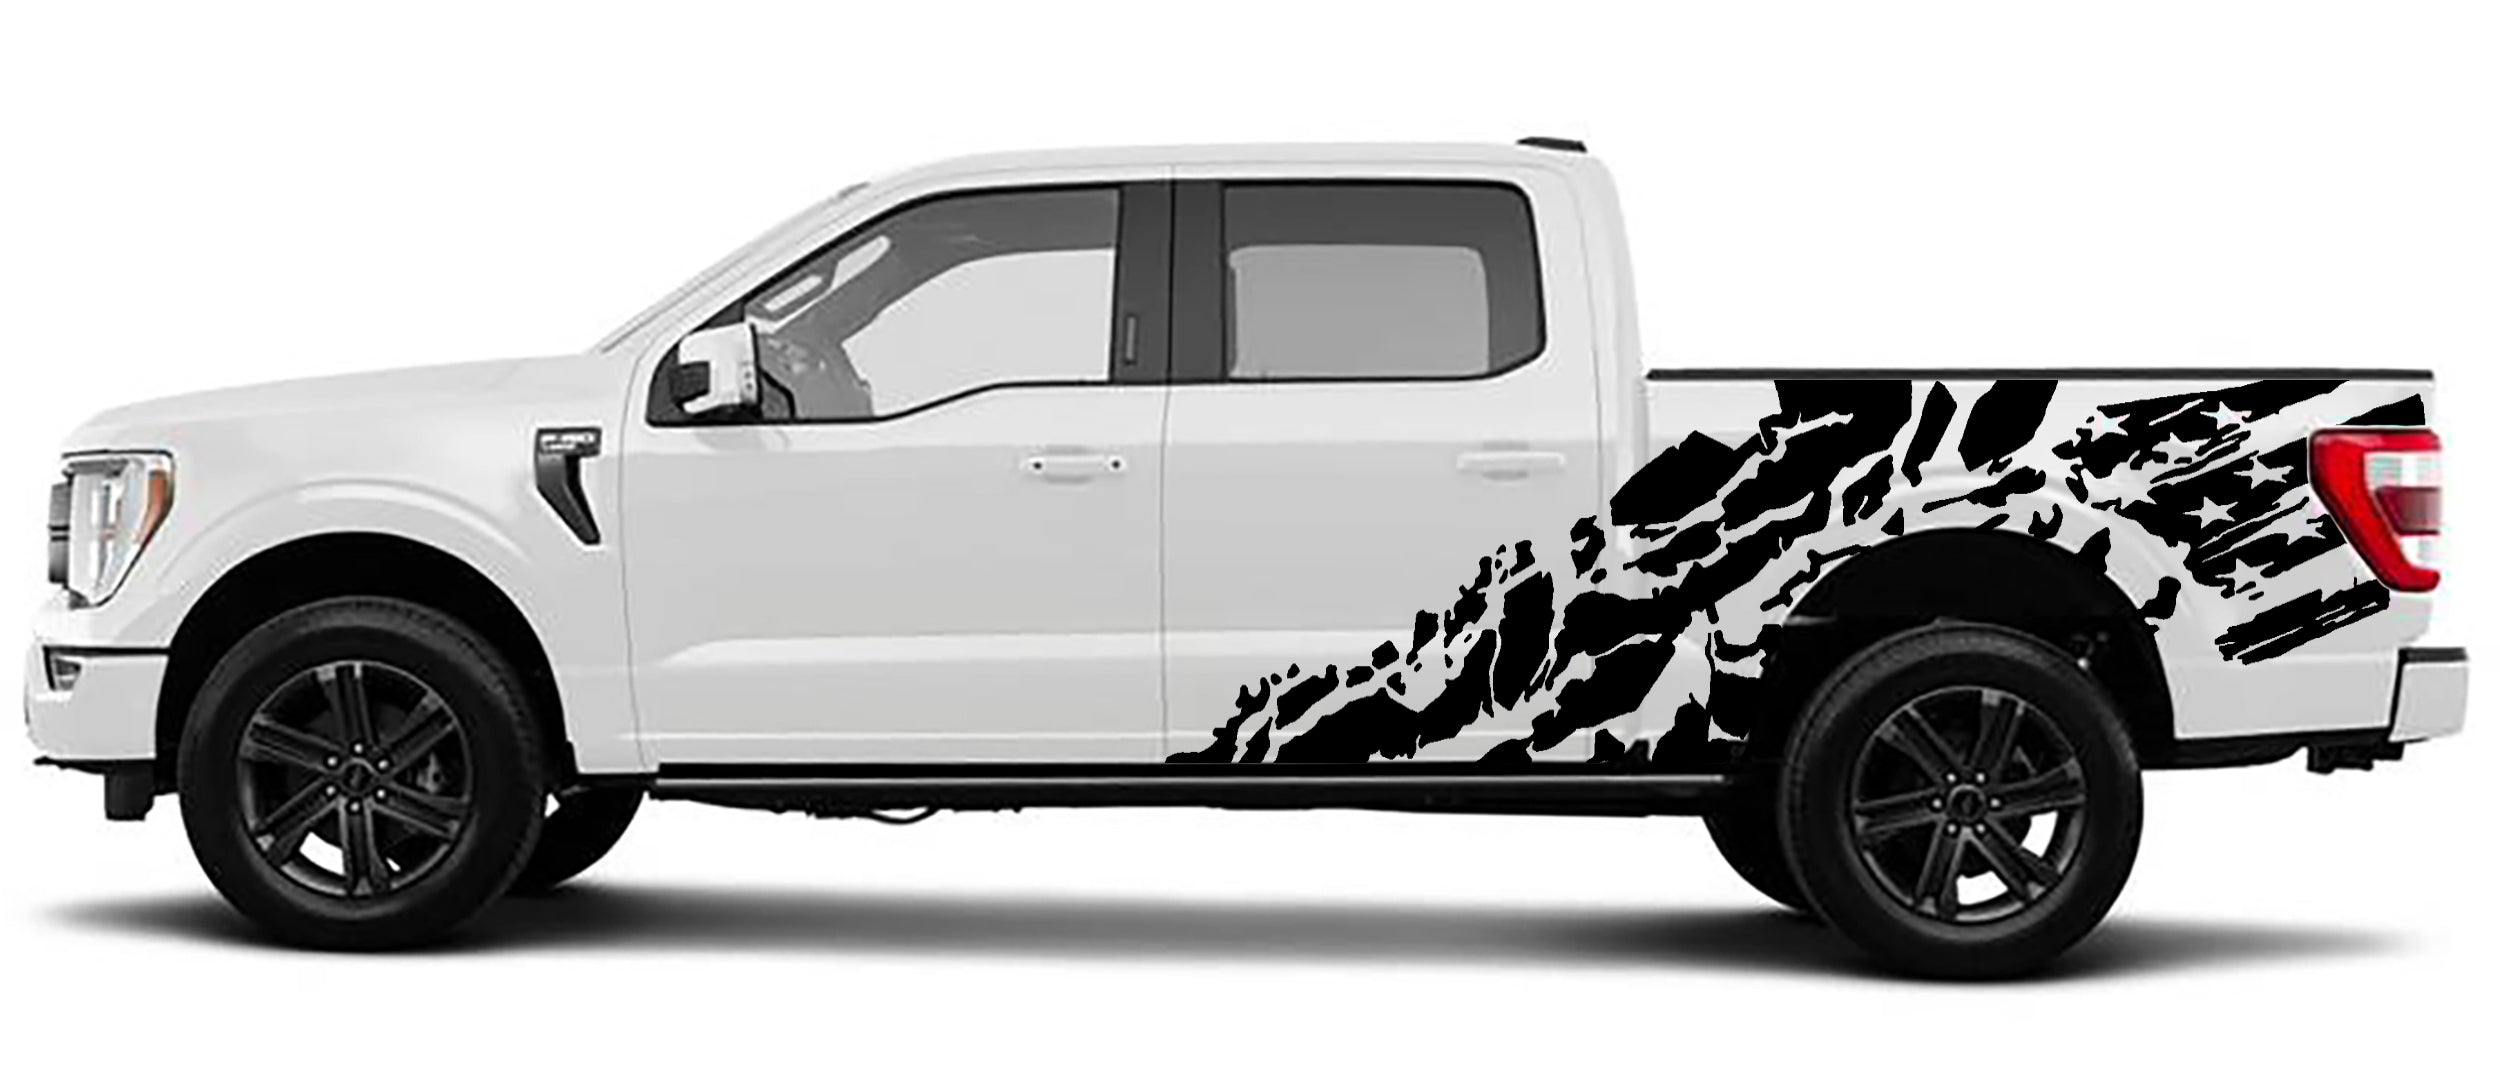 Ford F-150 Shredded US Flag Side Decals (Pair) : Vinyl Graphics Kit Fits (2021-2023)